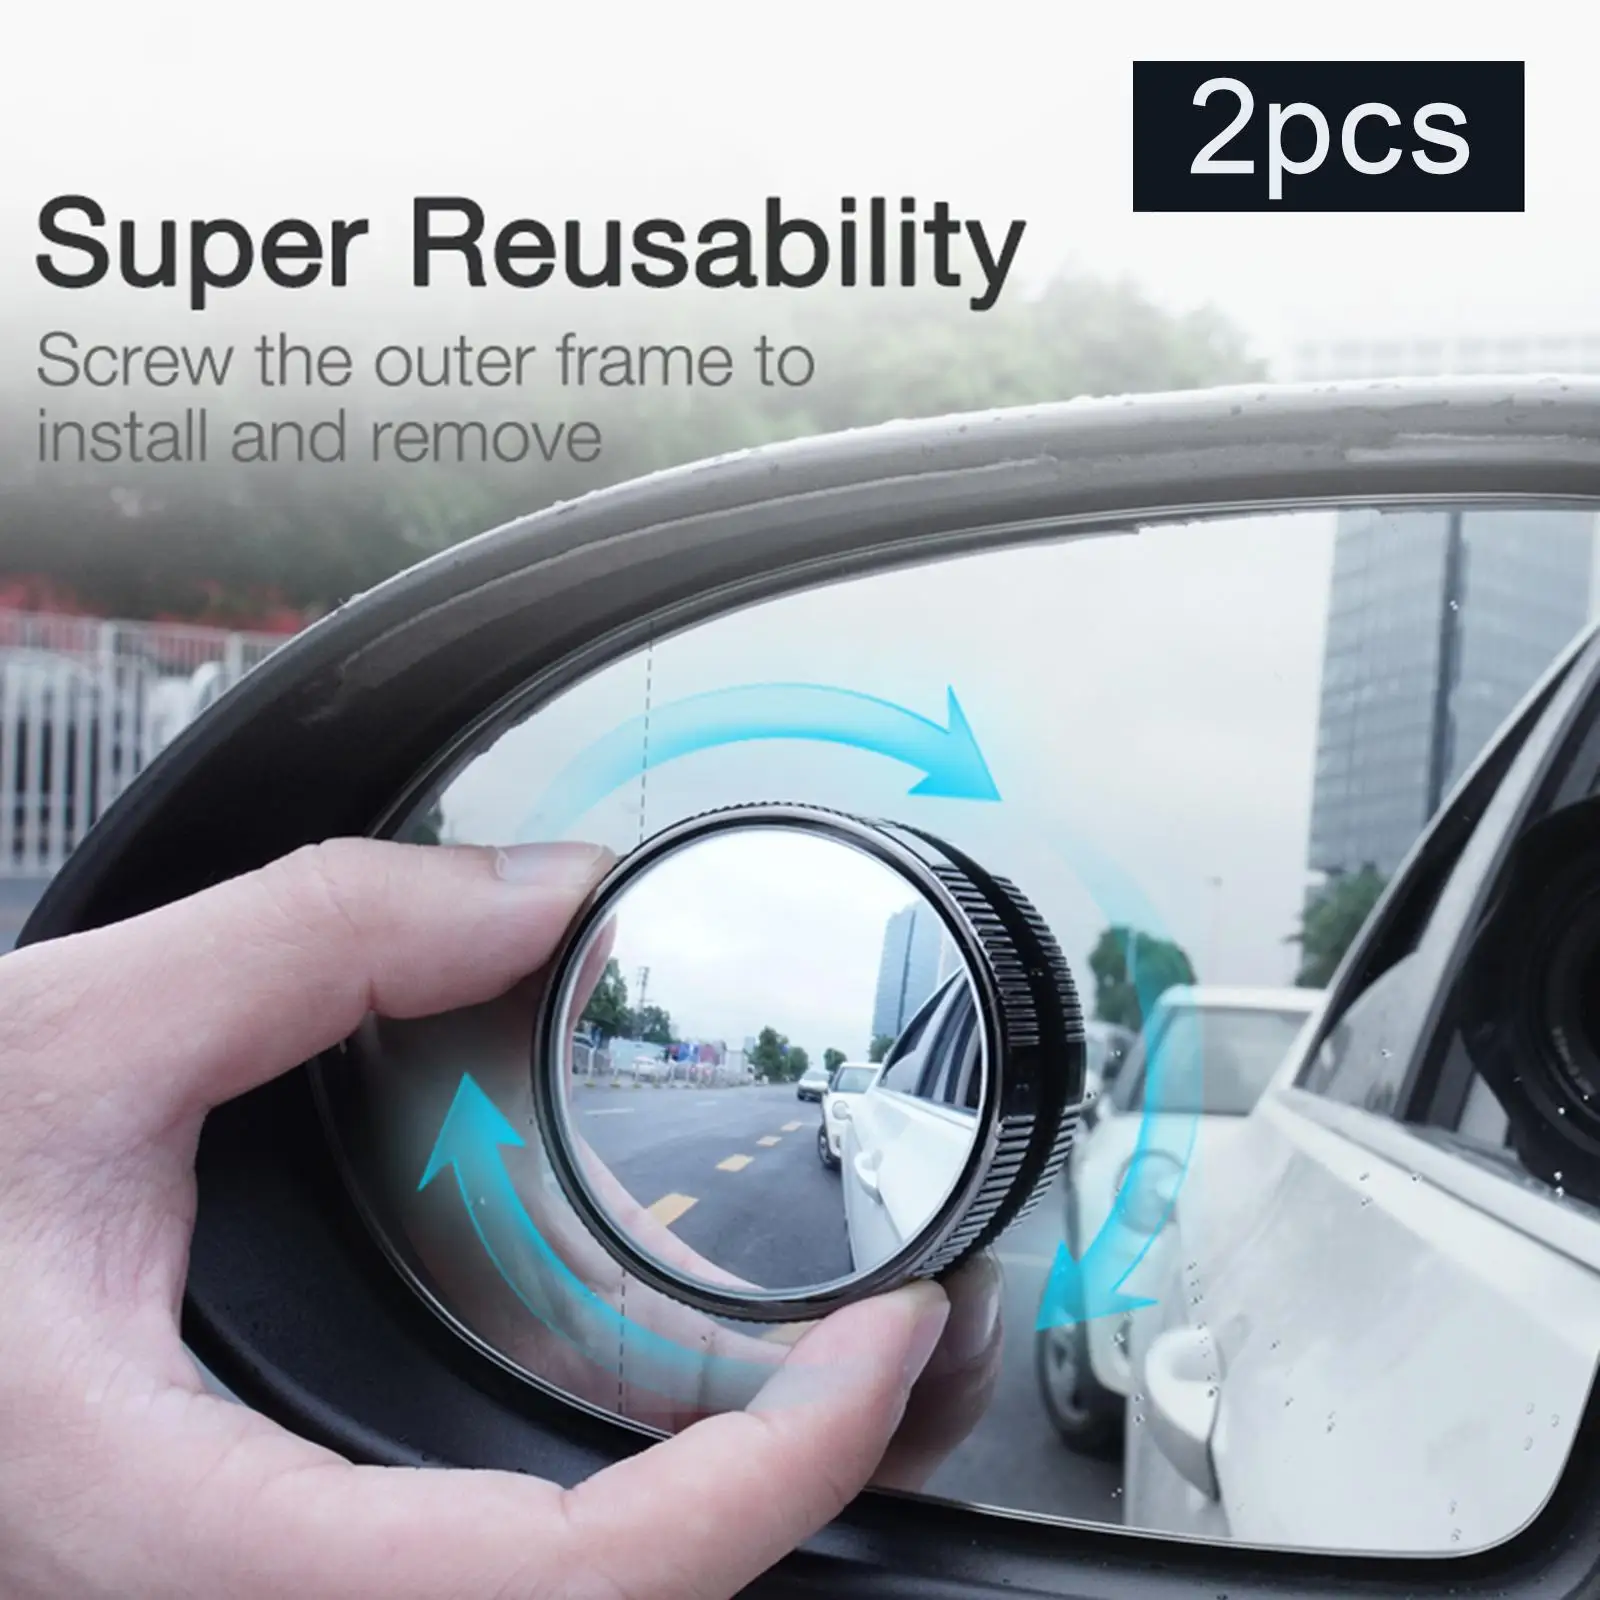 2 Pieces Blind Spot Mirrors HD Glass Convex Mirror for Cars Motorcycles